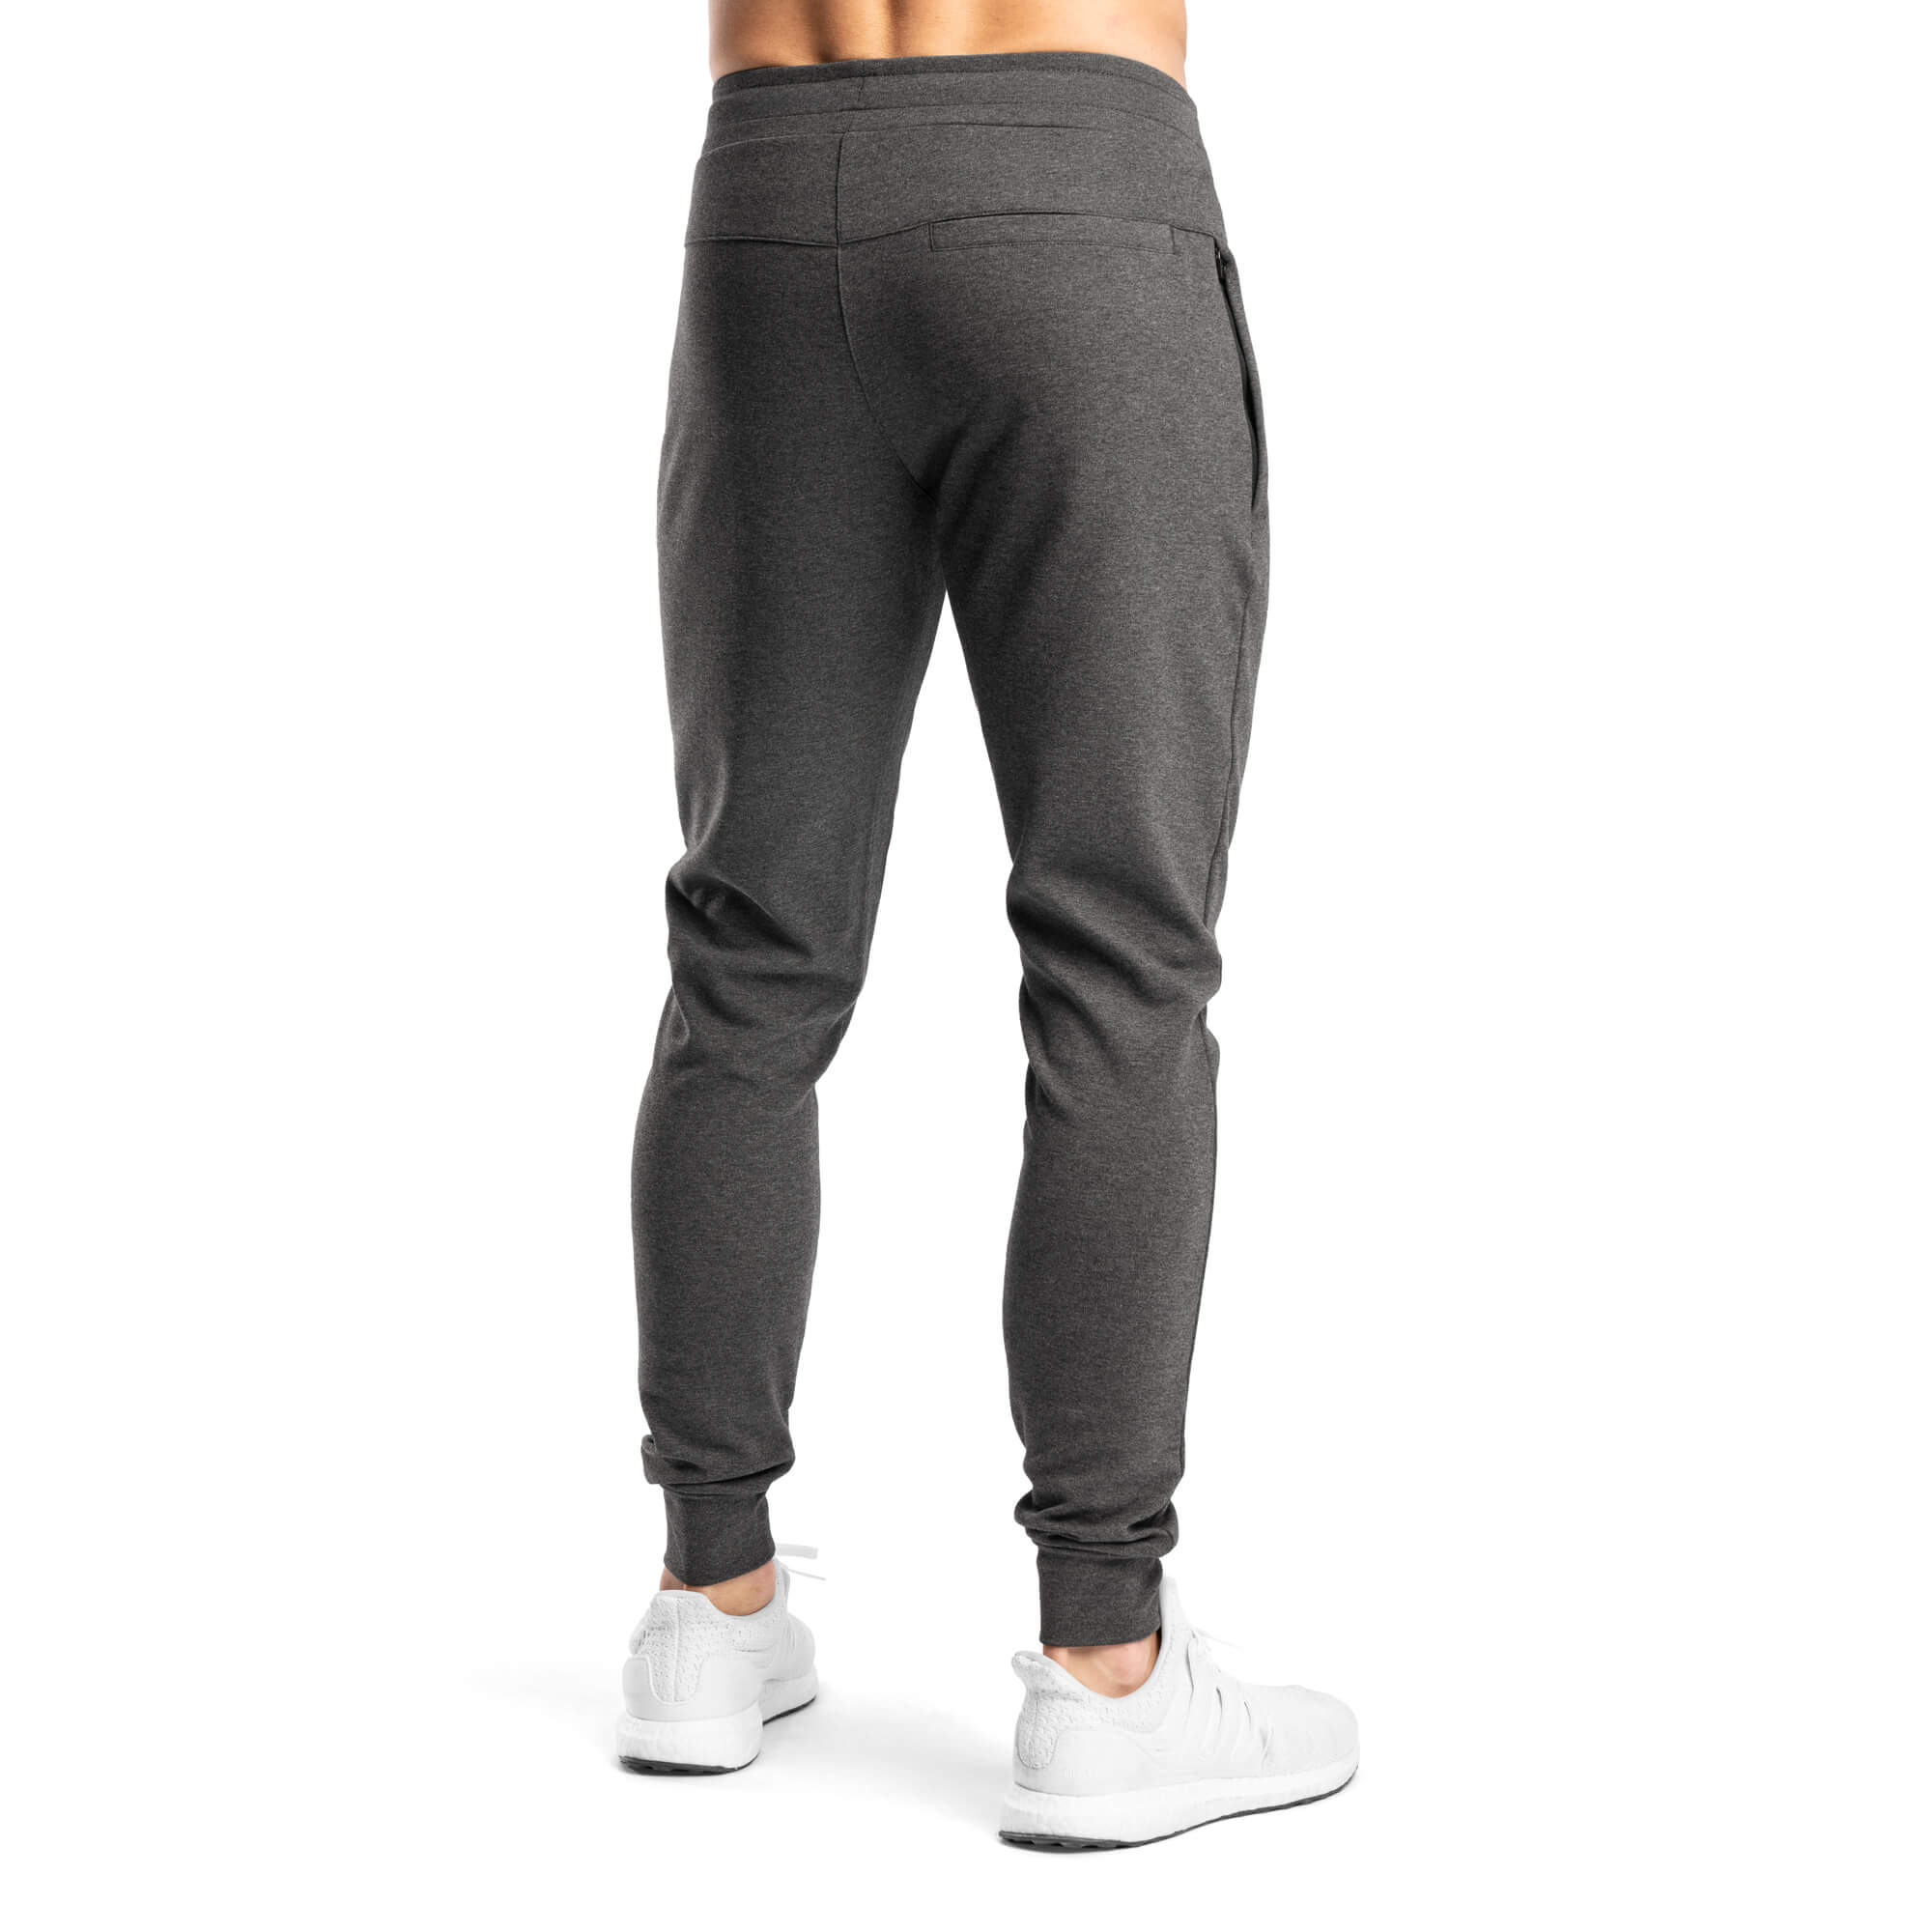 Athletic Bottoms 3.0 - Charcoal Marl